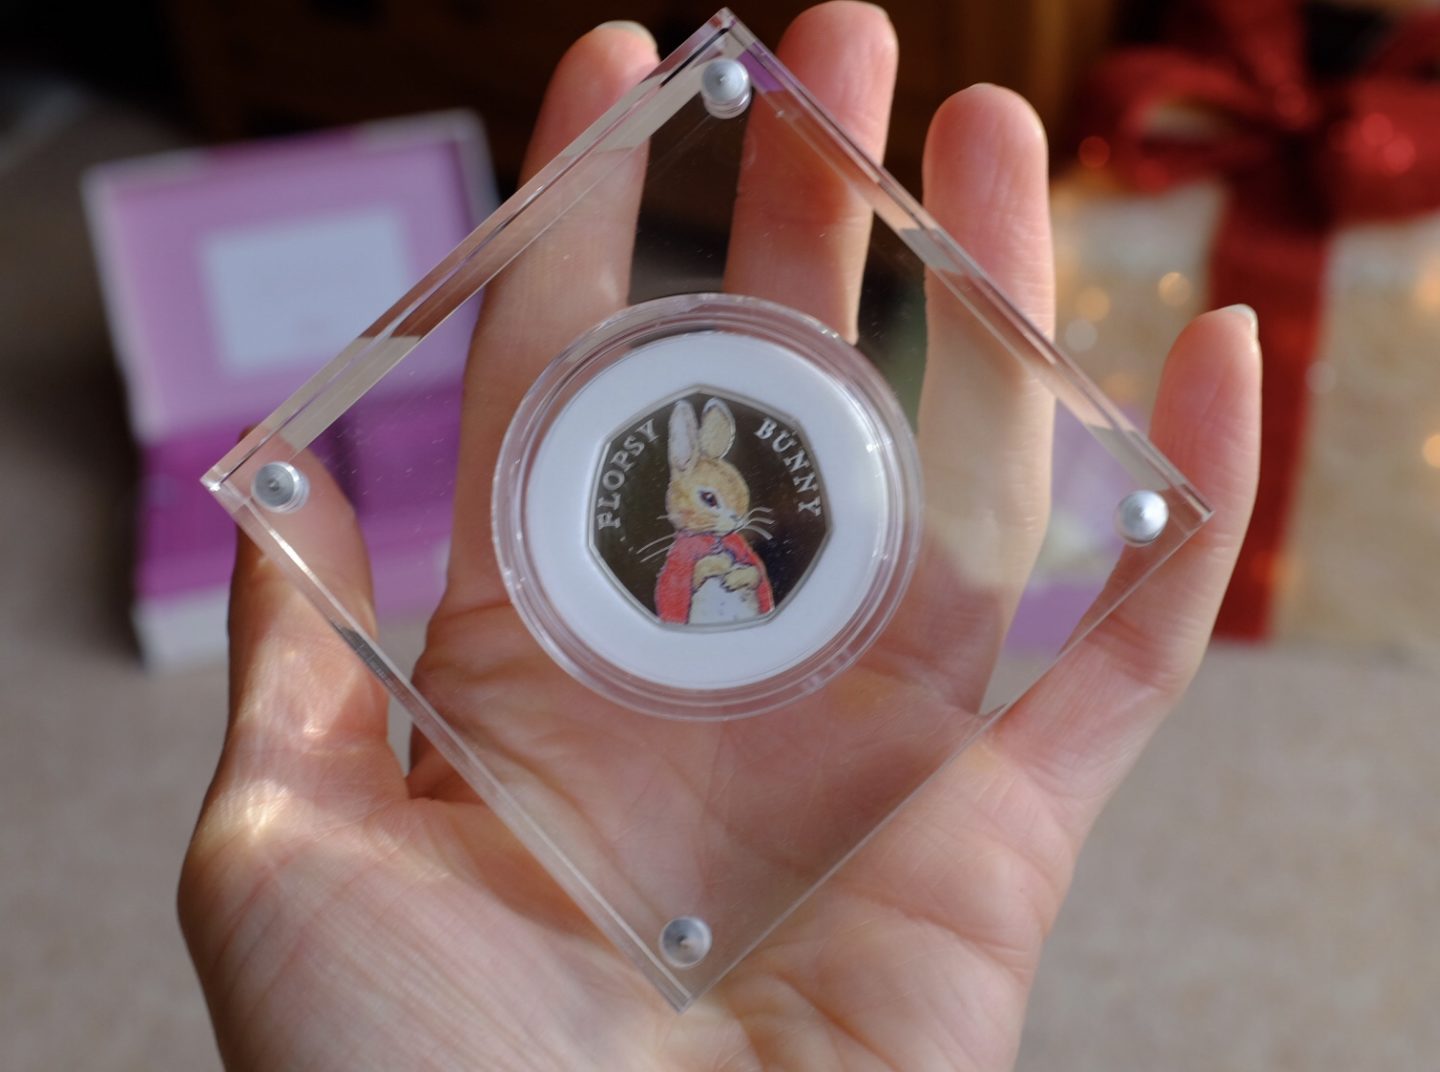 The Flopsy coin from The Flopsy Bunny™ 2018 UK 50p Silver Proof Coin & Book Gift Set Royal Mint